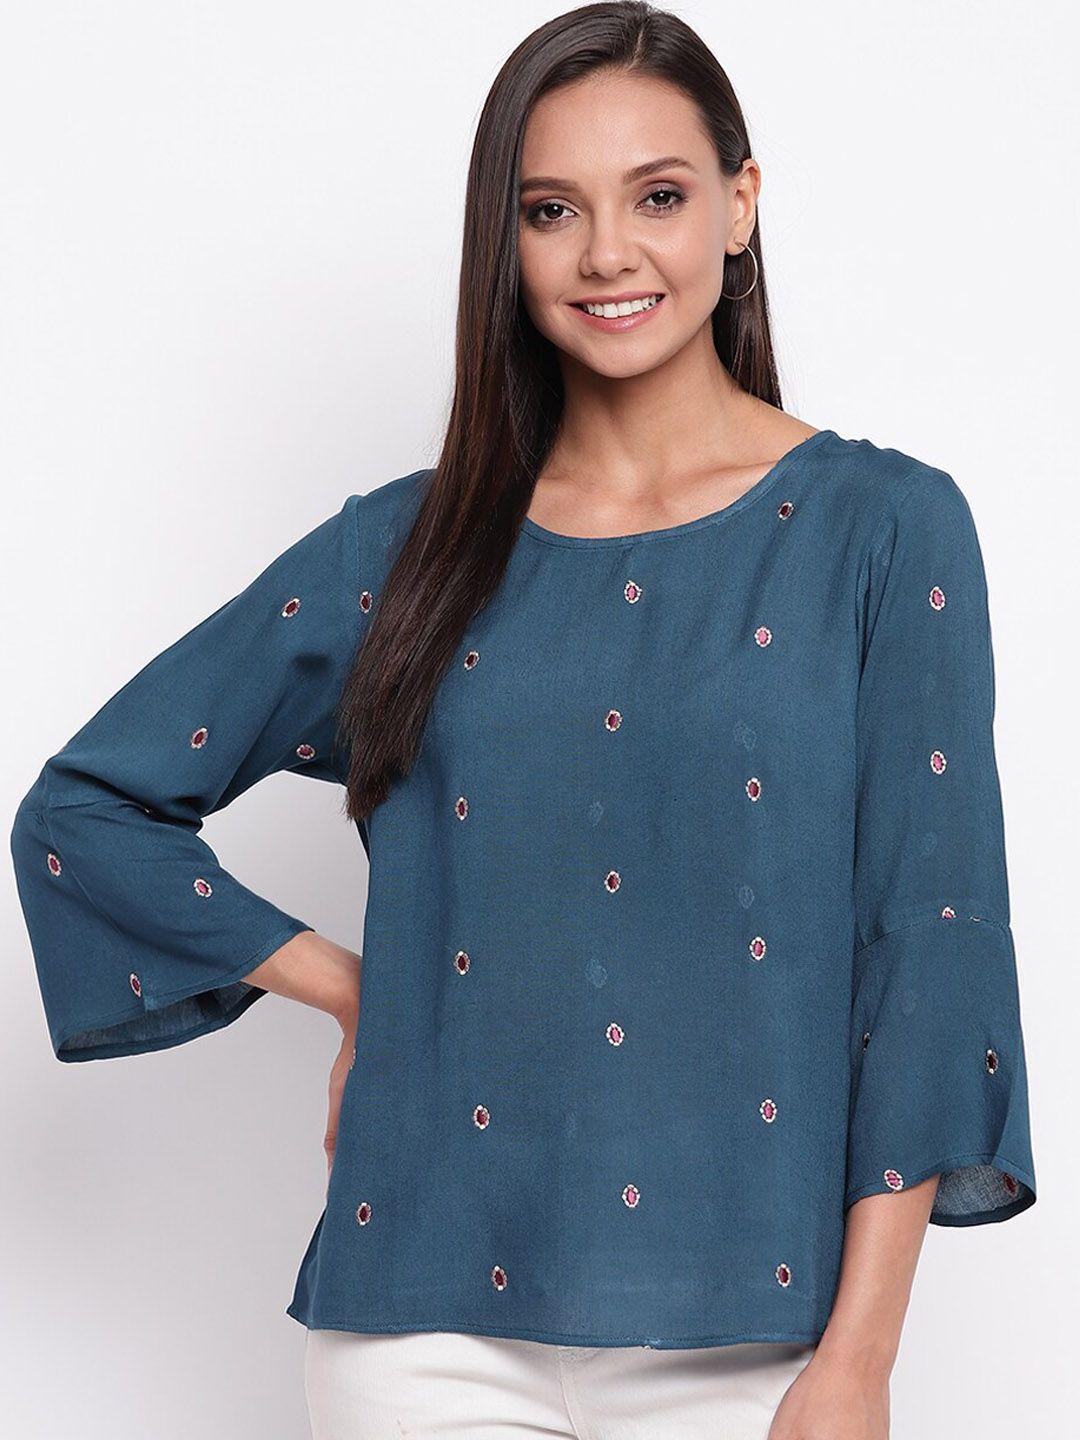 mayra women teal blue solid pure cotton top